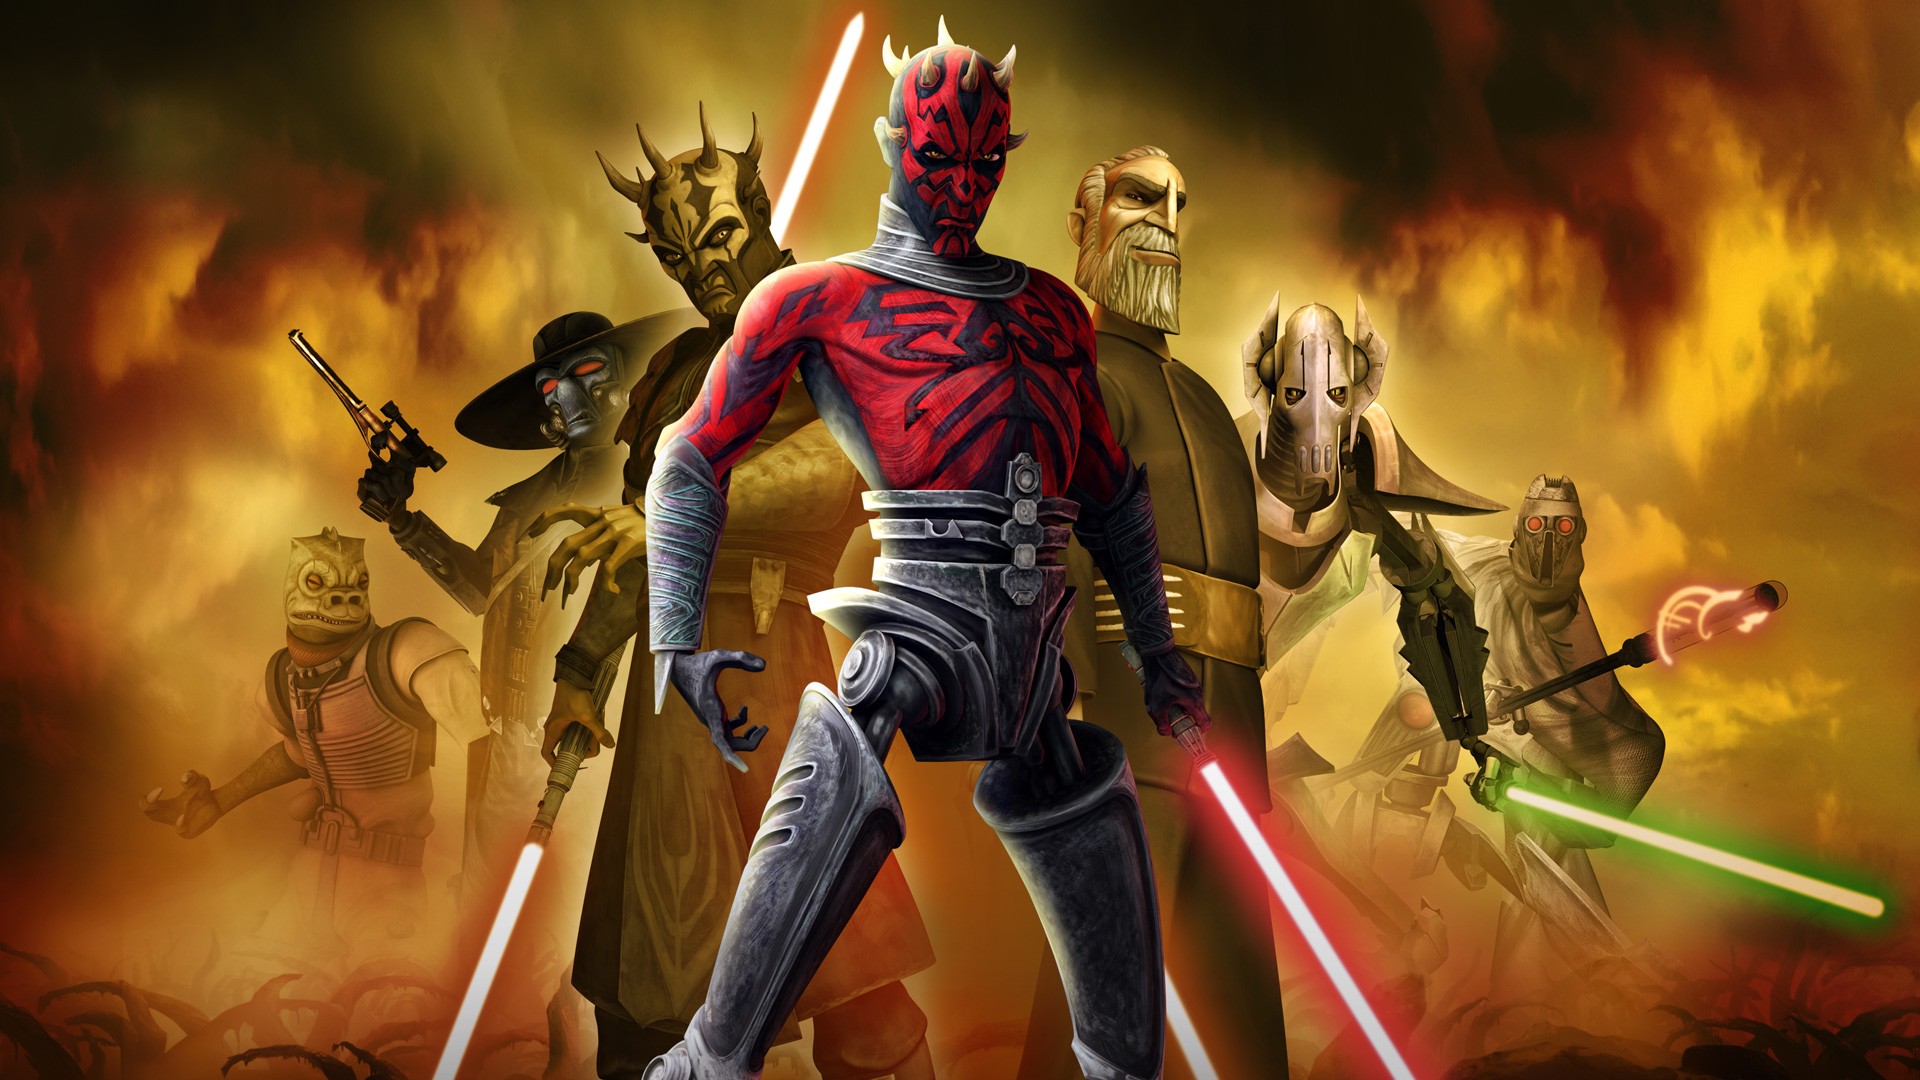 Star Wars The Clone Wars 4K Wallpapers